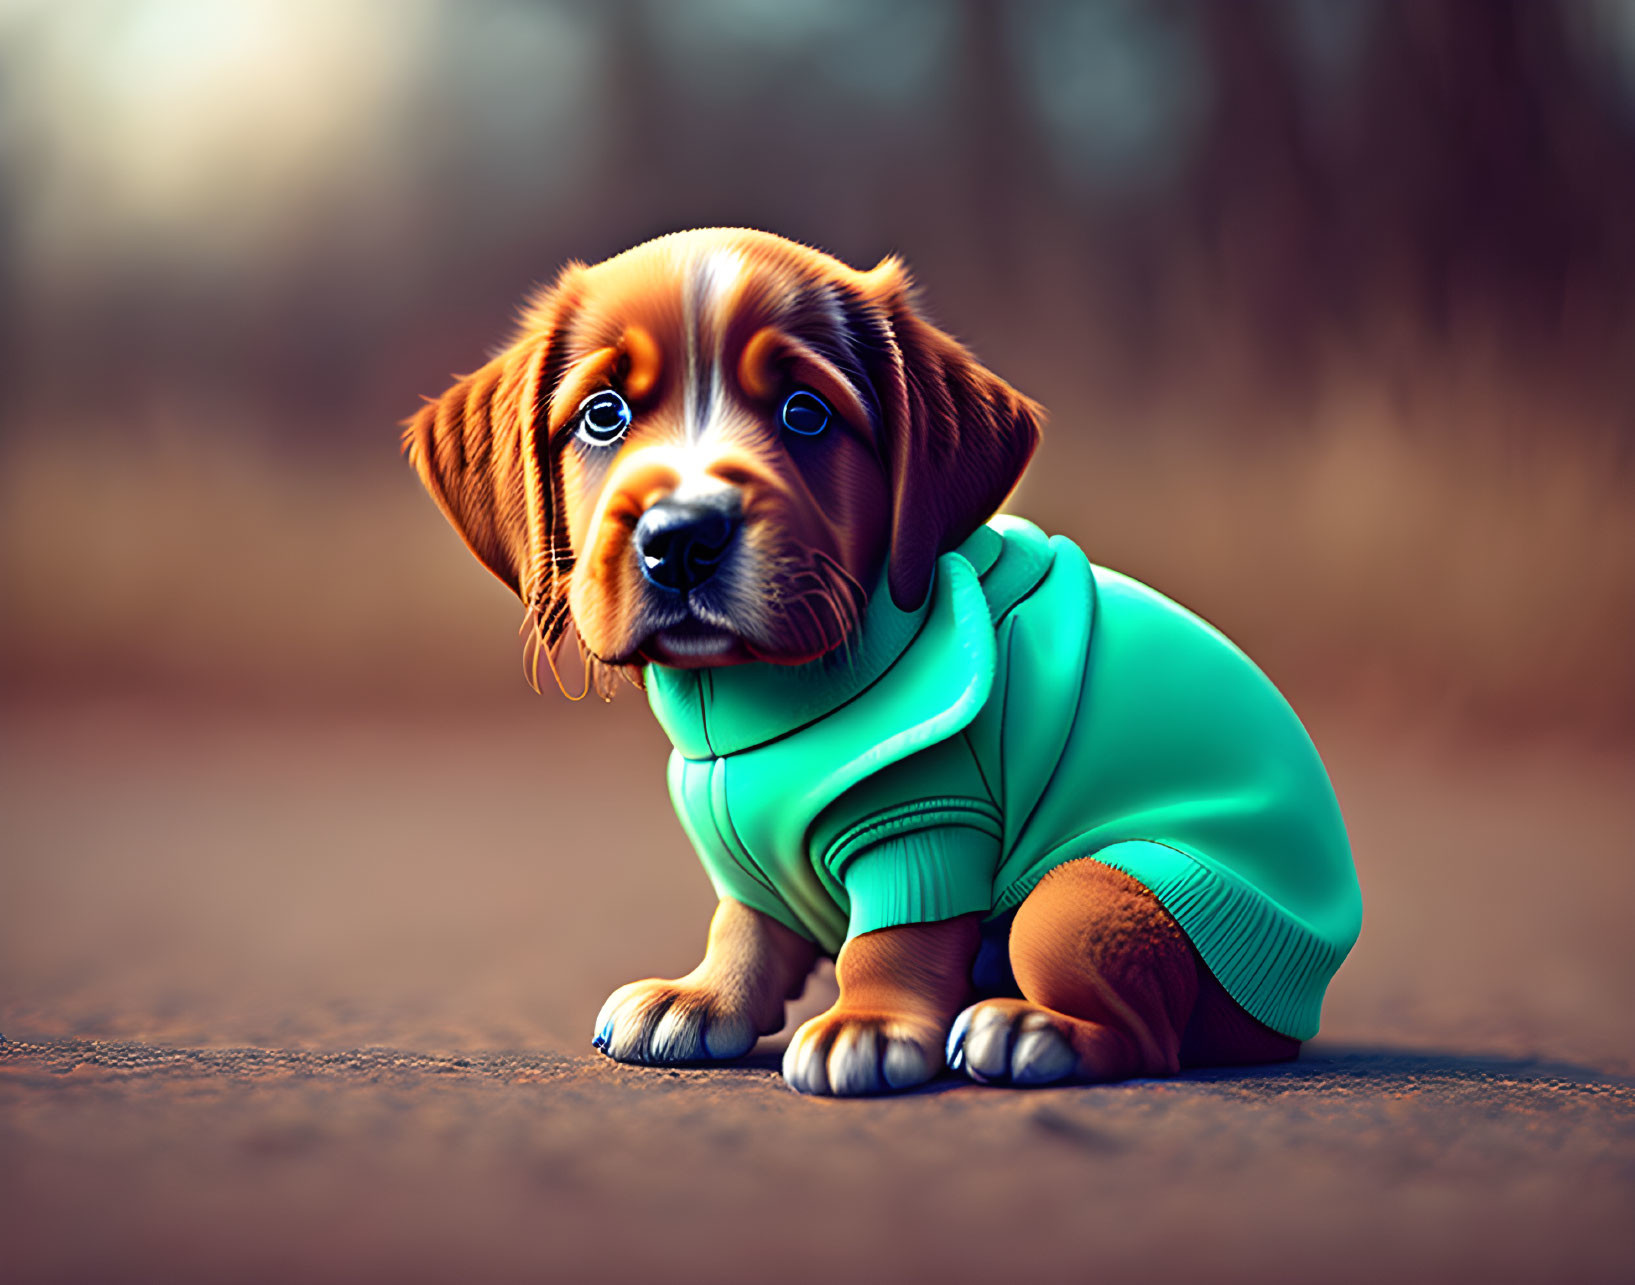 Brown Puppy in Teal Hoodie Sitting on Path